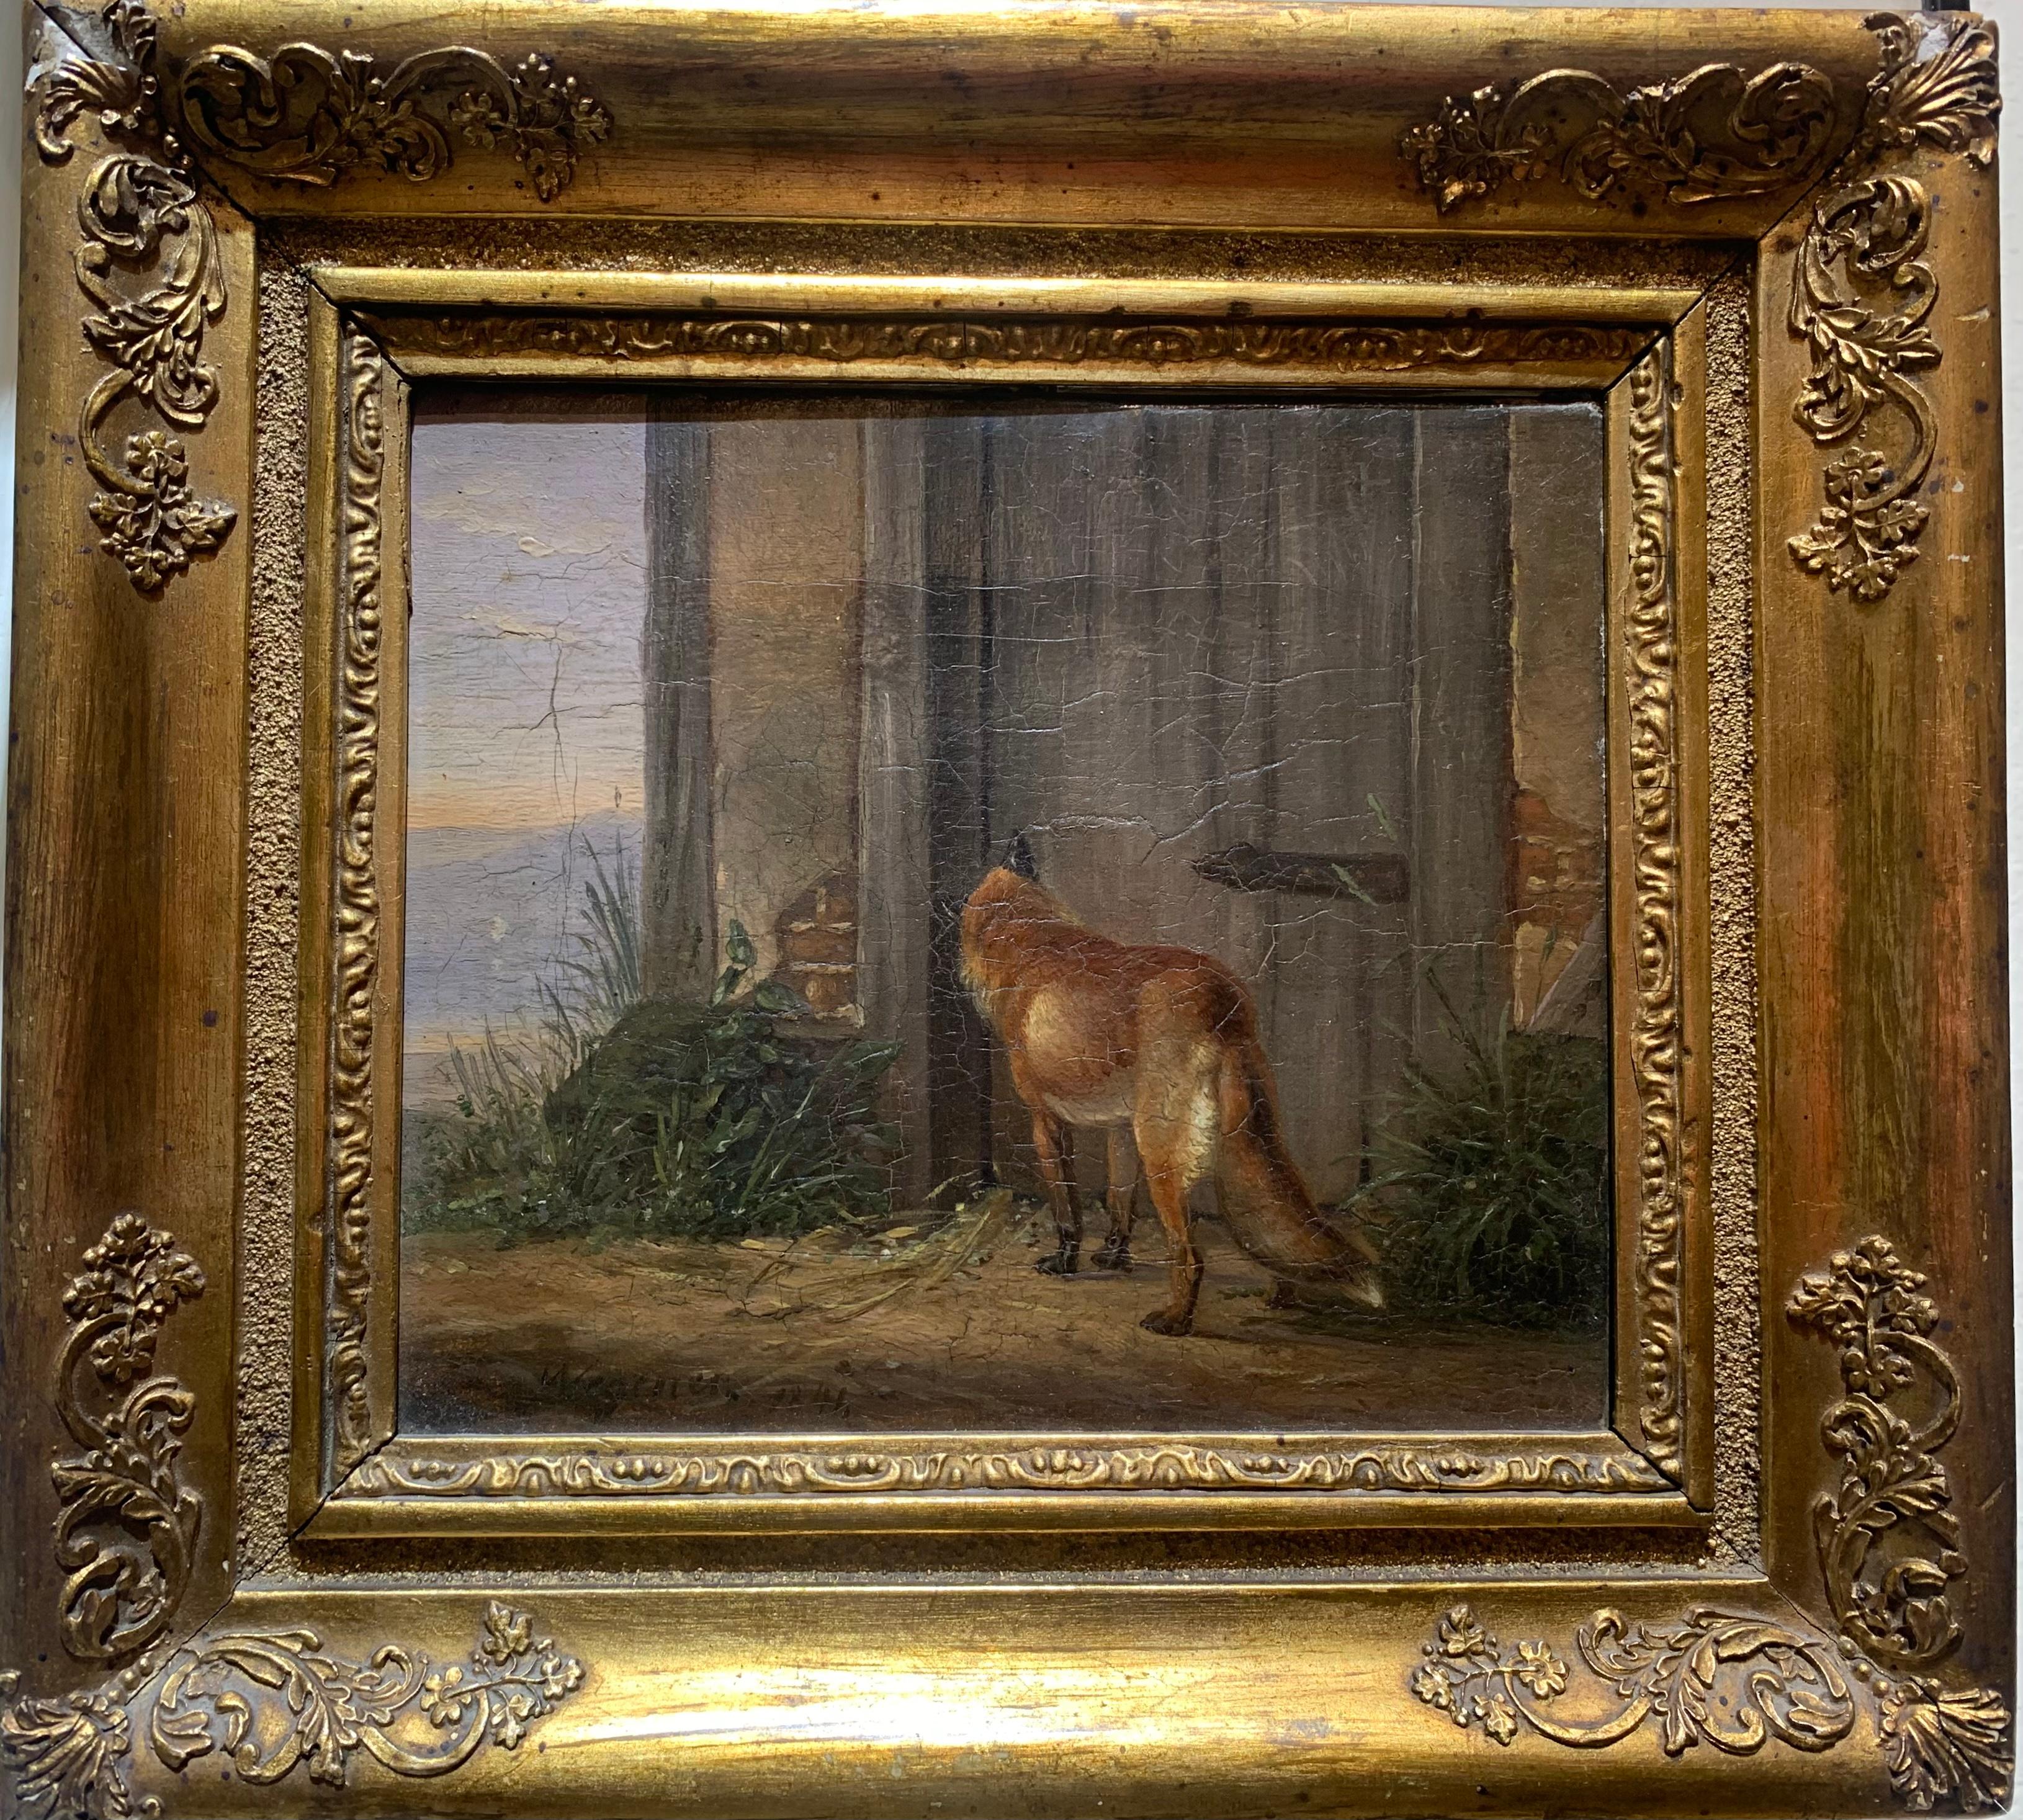 The Fox Hunting a Prey. Painting signed Wegener, dated 1841. 4